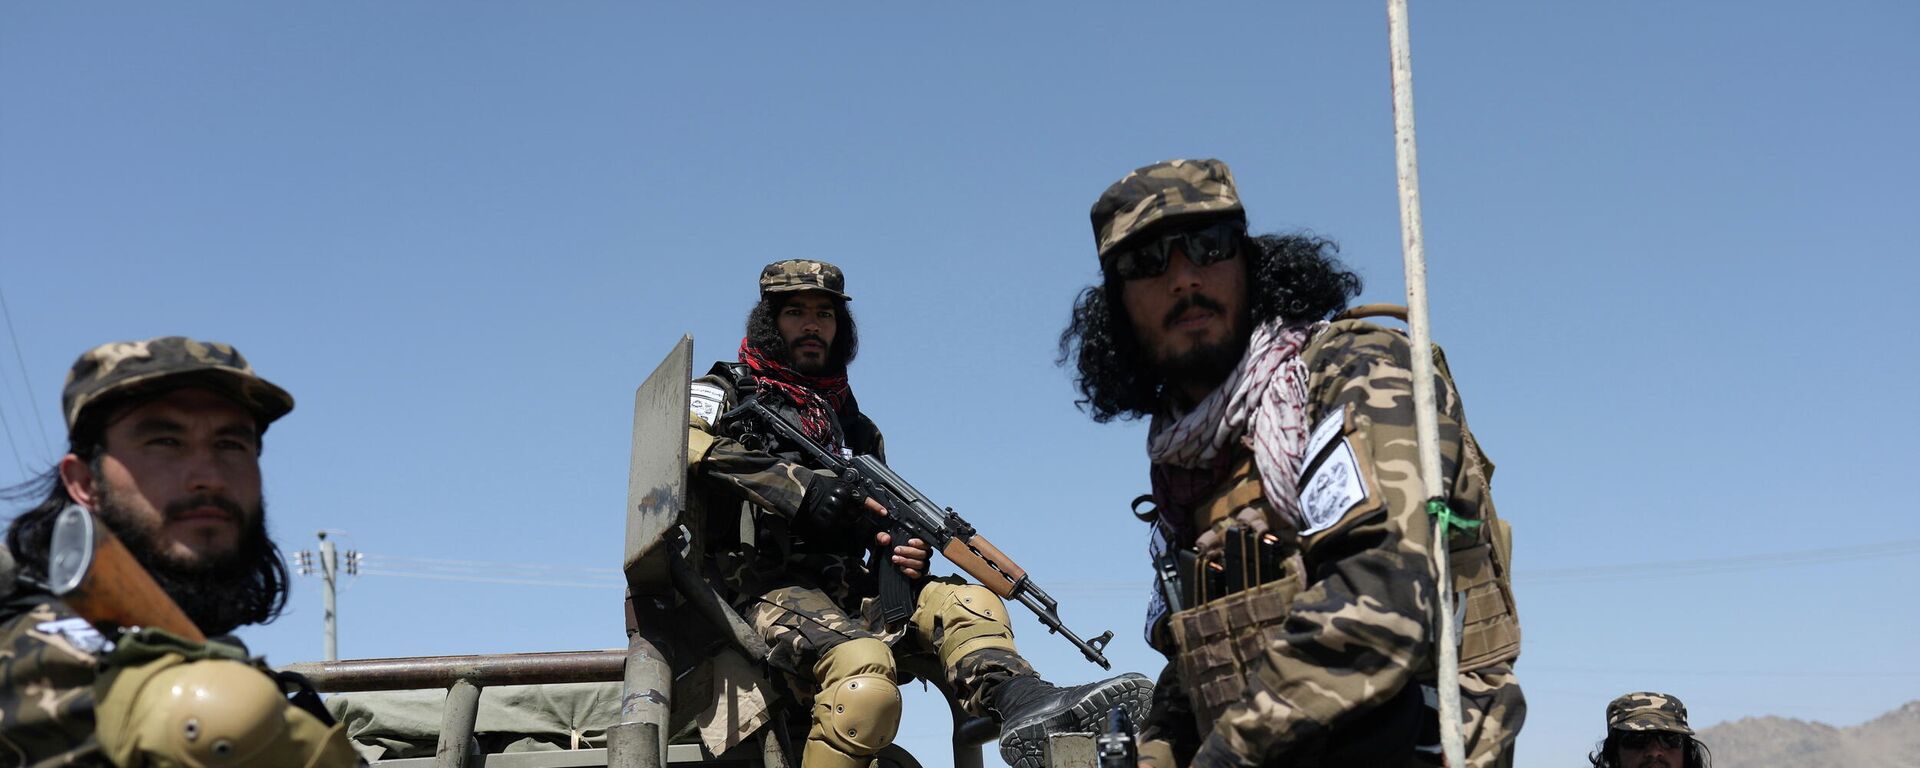 Members of the Taliban Intelligence Special Forces guard the military airfield in Kabul - Sputnik International, 1920, 28.10.2021